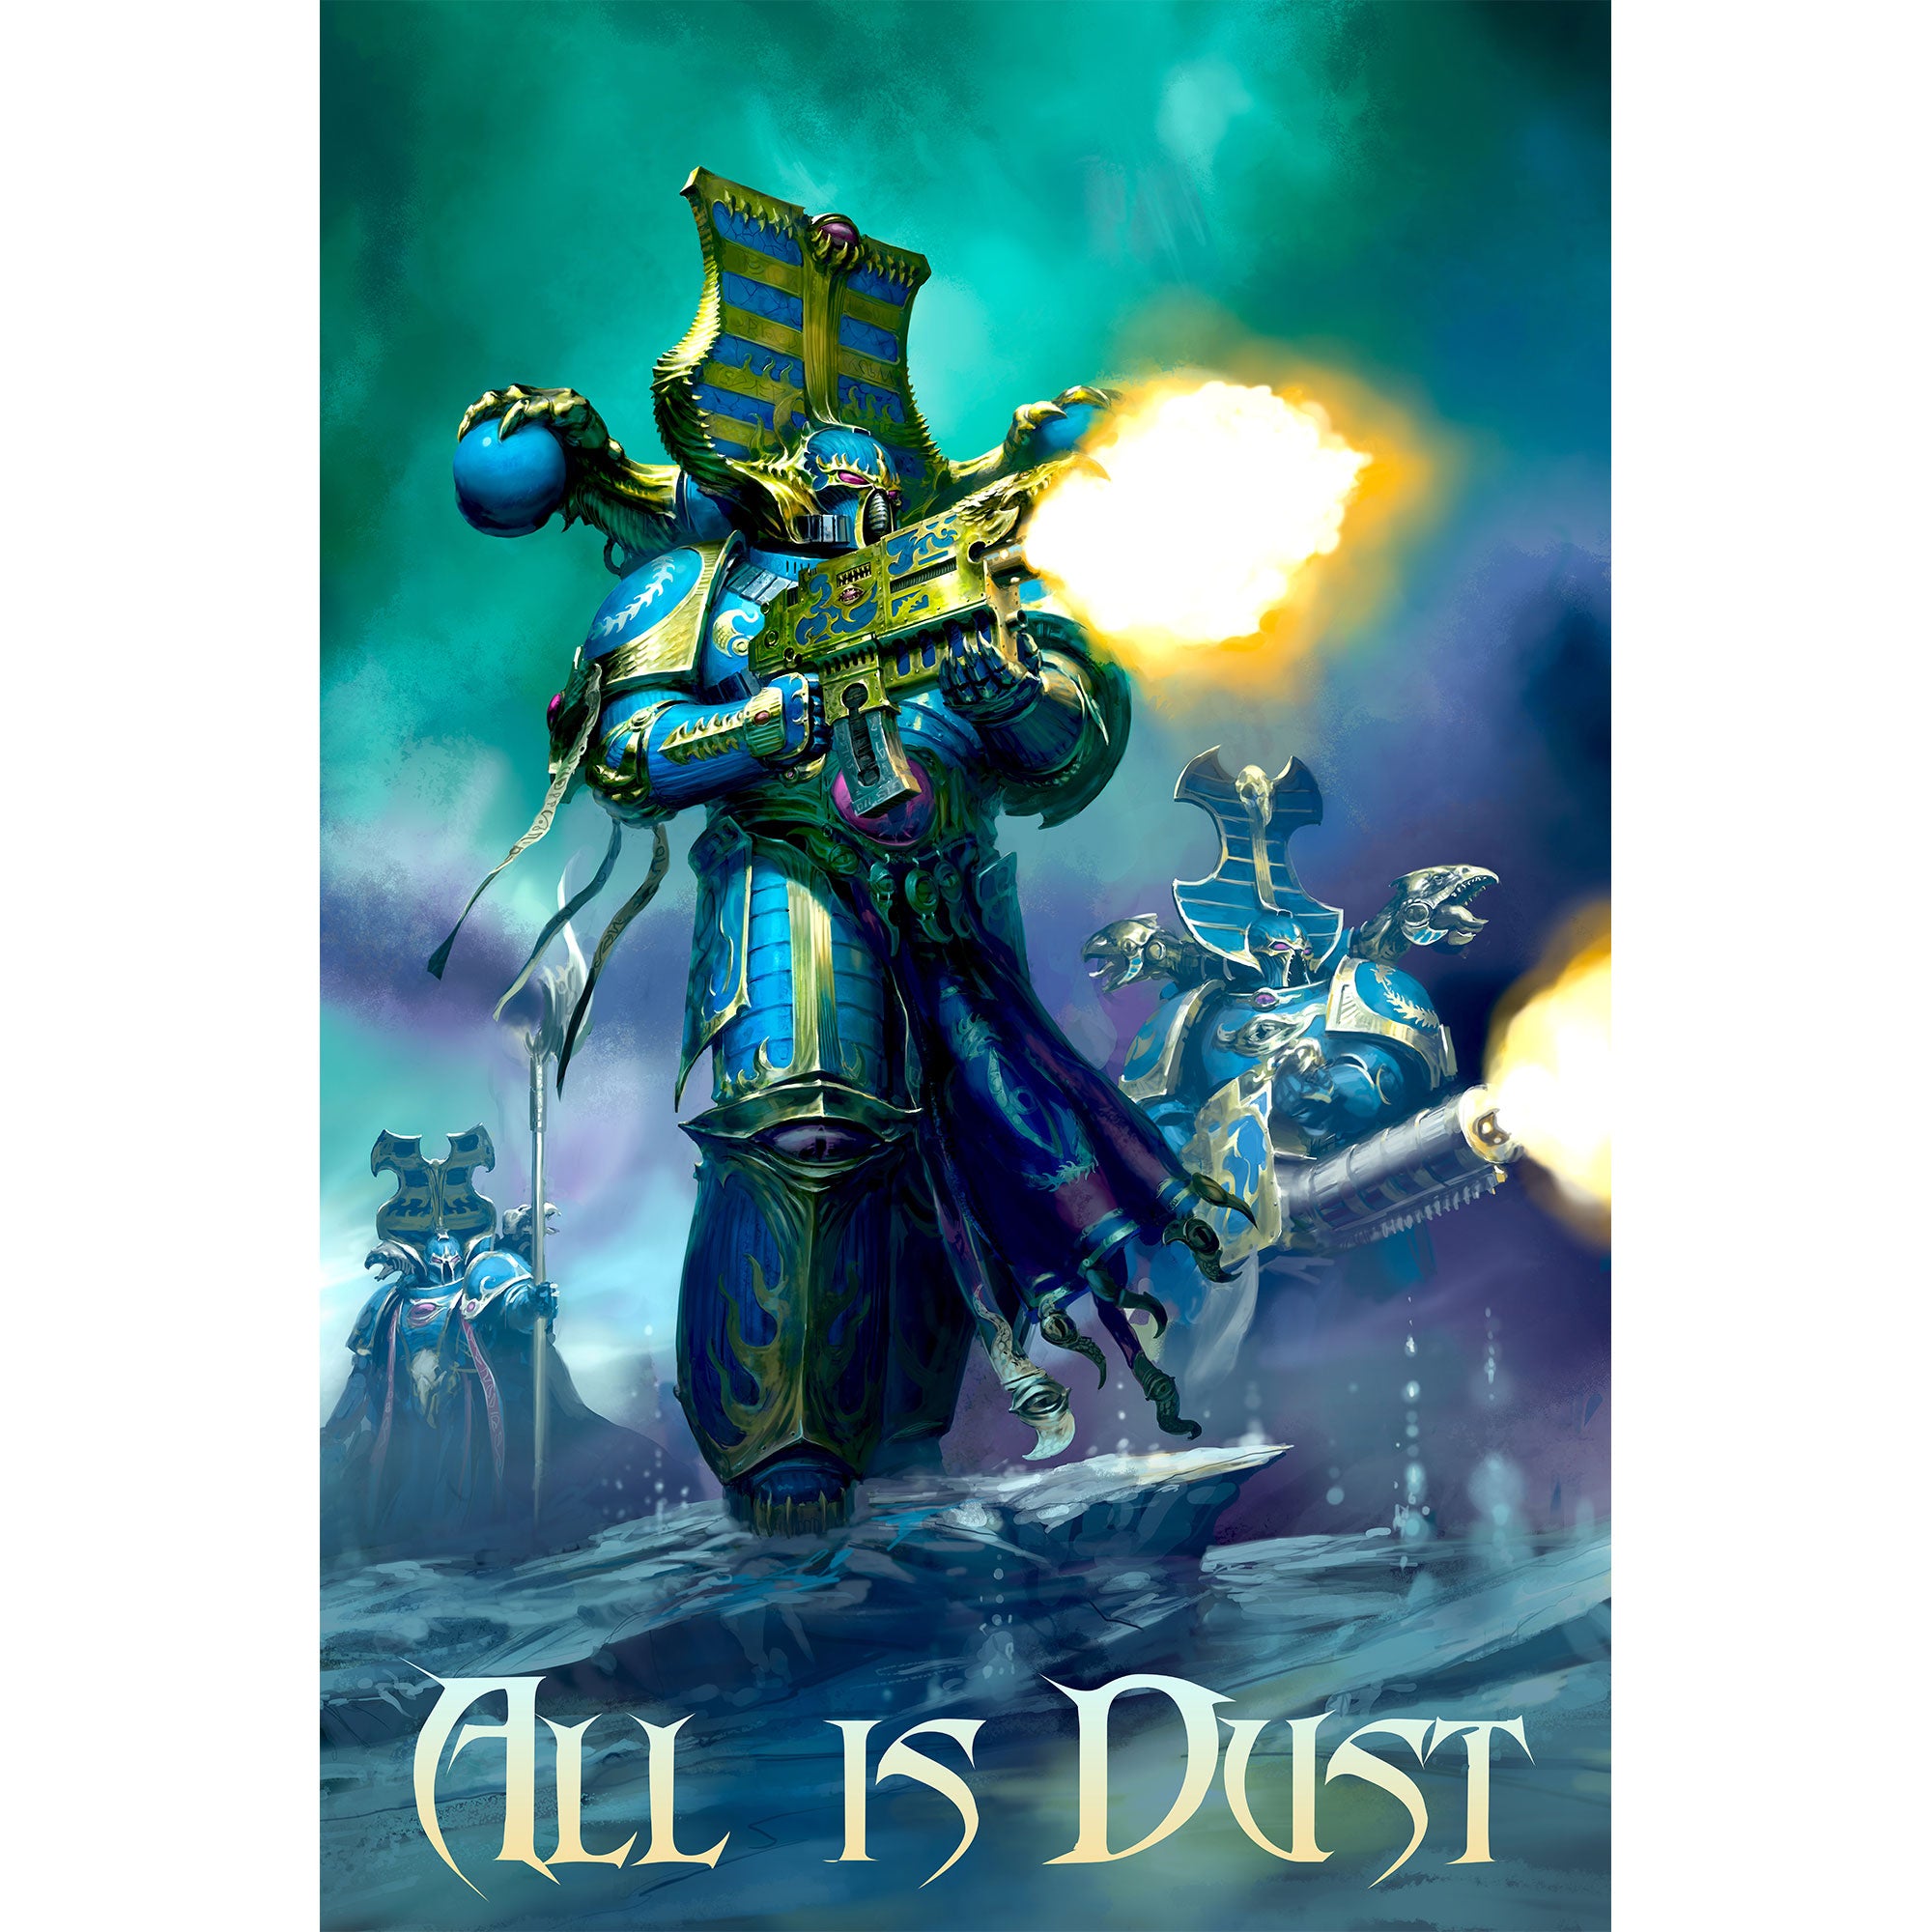 Thousand Sons Poster